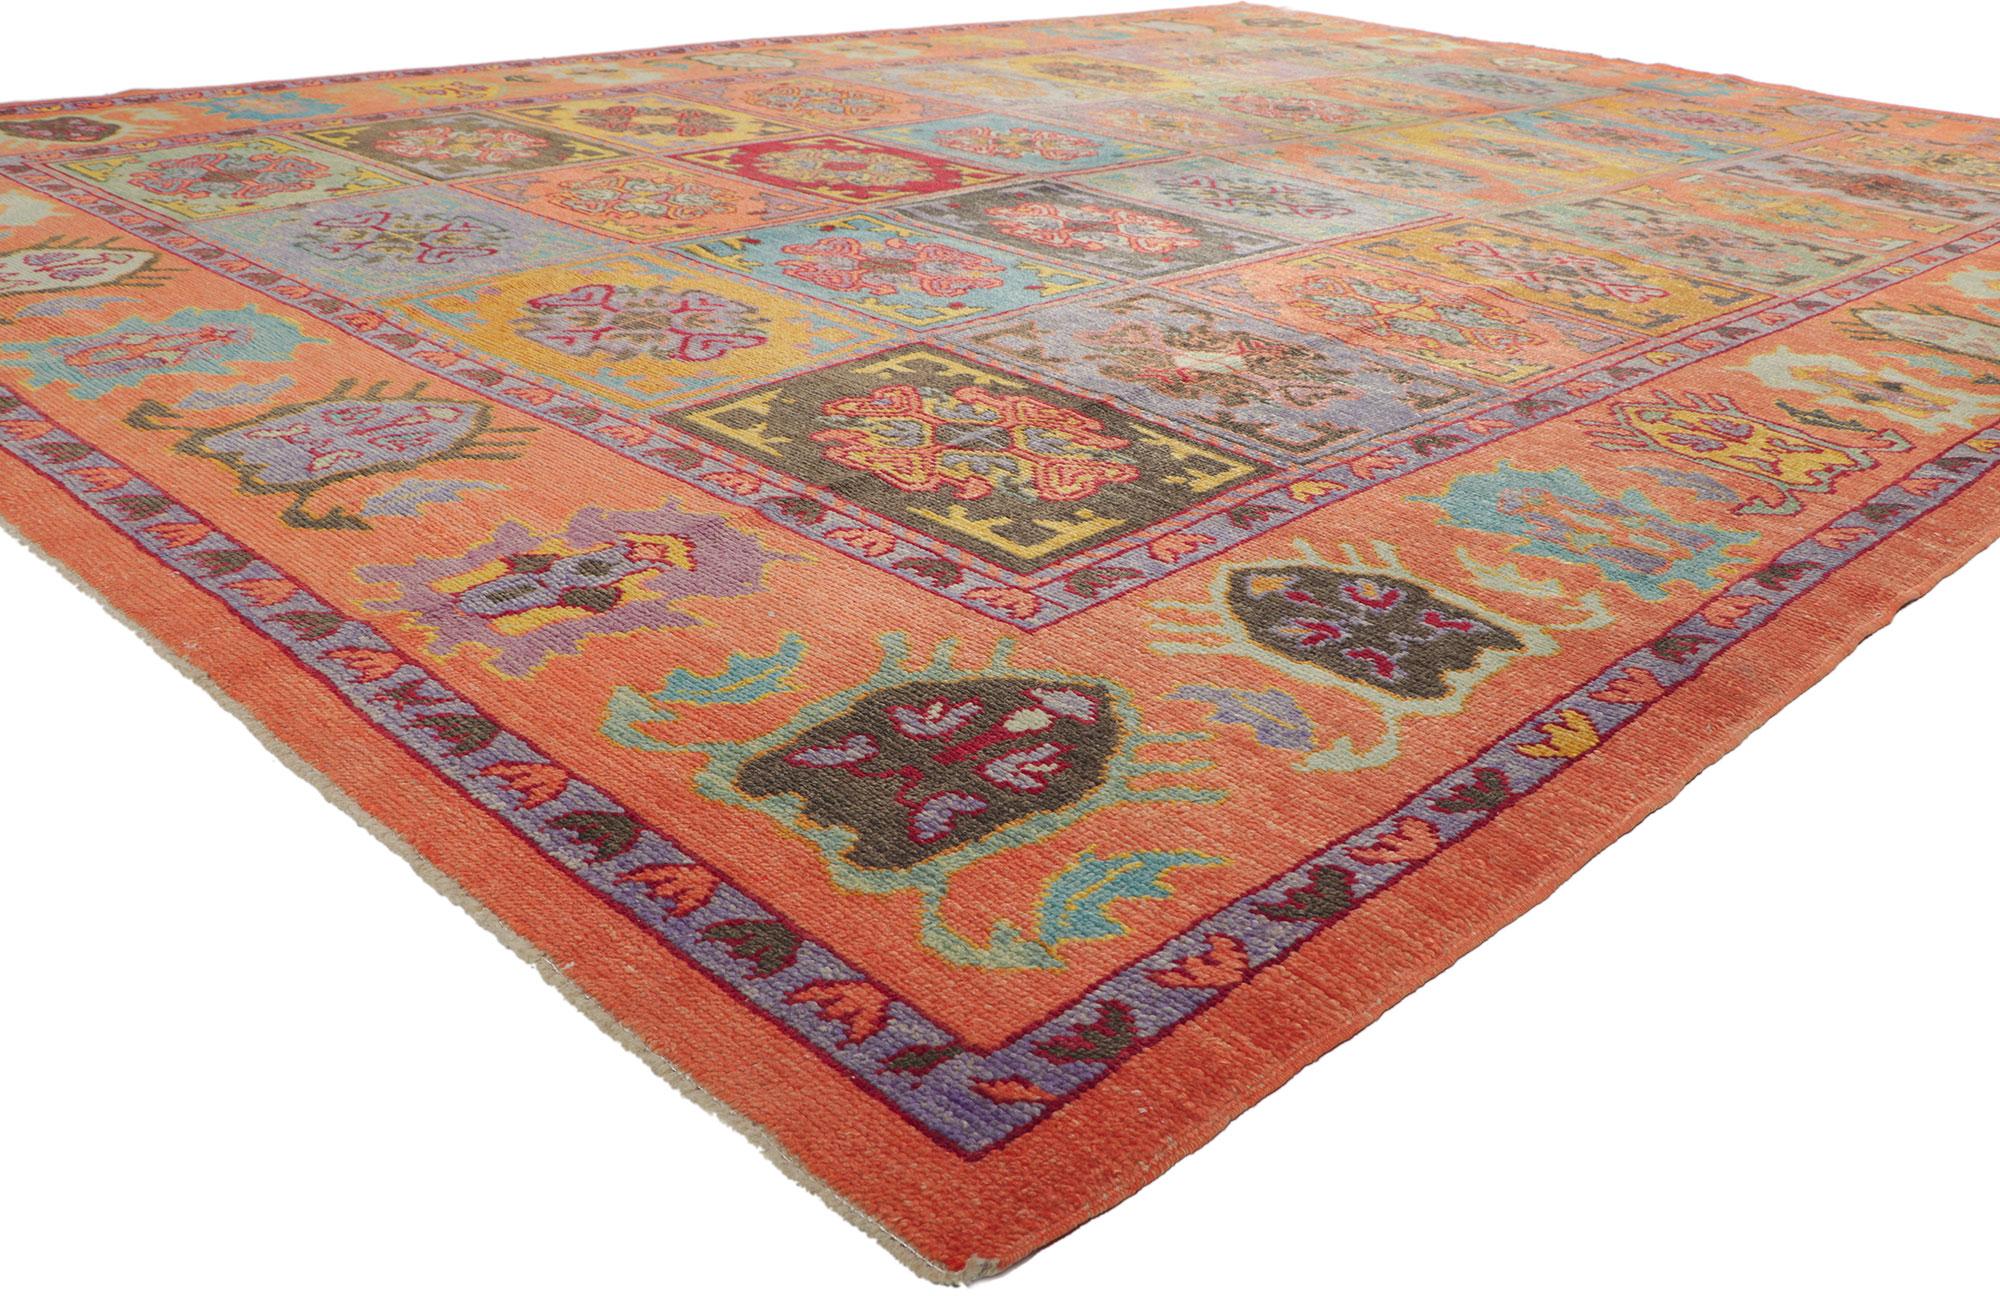 51884 New Colorful Turkish Oushak Rug with Modern Style 10.02 x 13.08.
Polished and playful, this hand knotted wool contemporary Turkish Oushak rug is a captivating vision of woven beauty. The abrashed orange field features an allover geometric